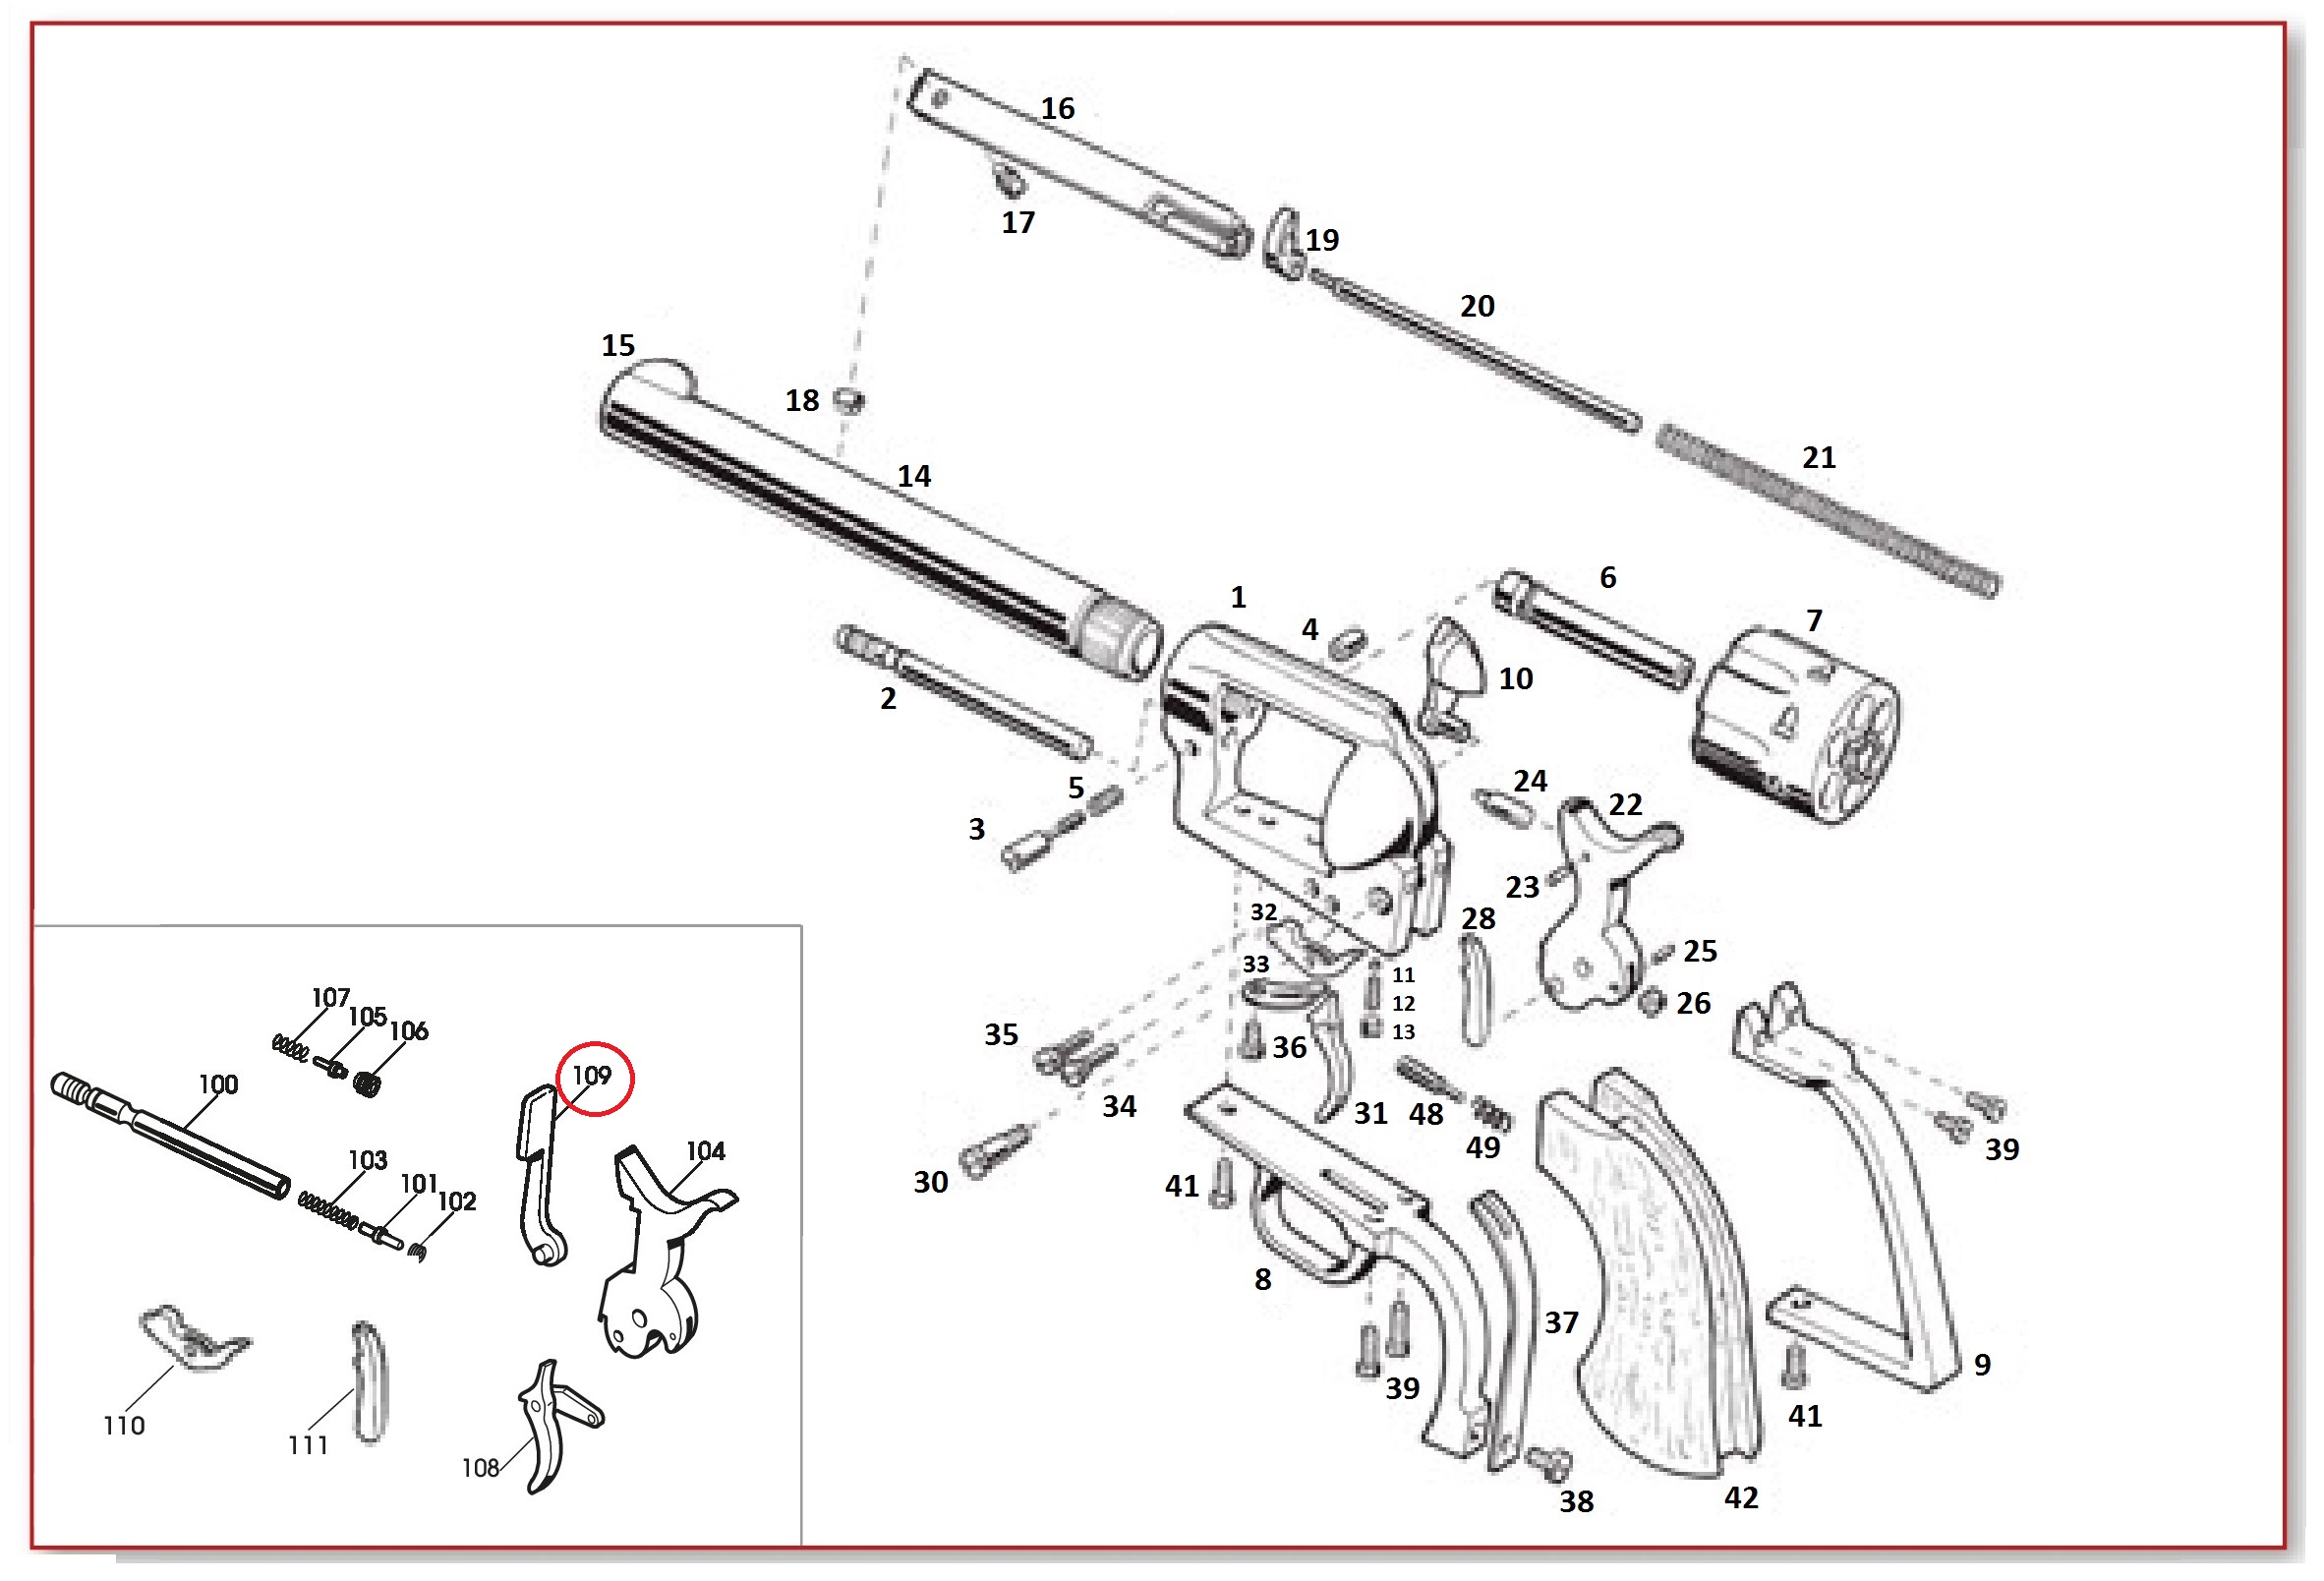 Show product details for #109 Transfer Bar Lever